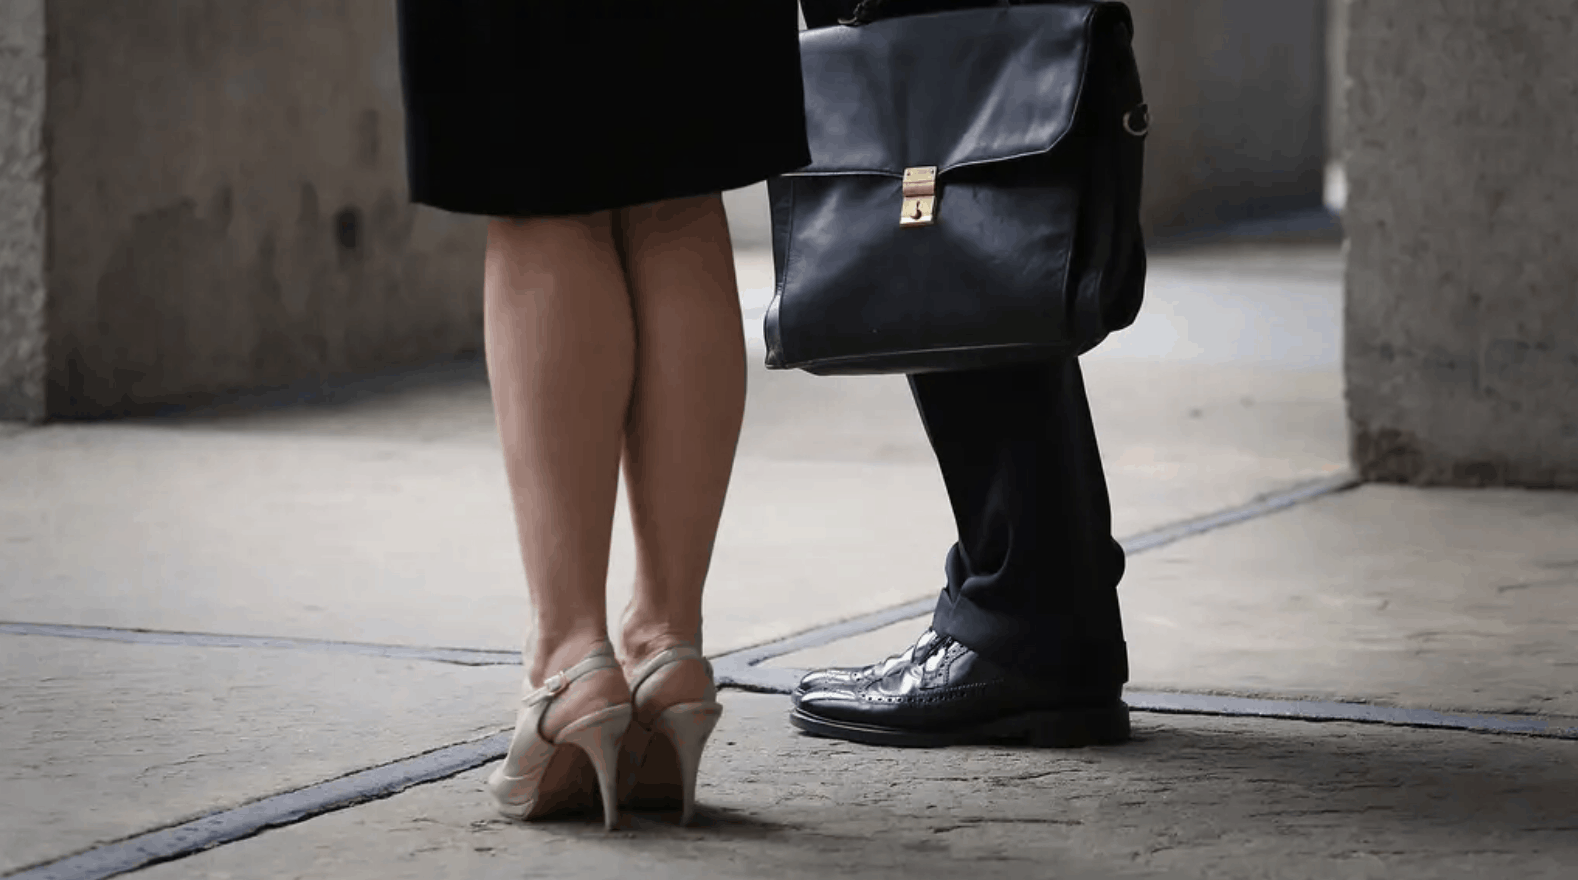 Investment banks pay women just 56% of what male colleagues earn